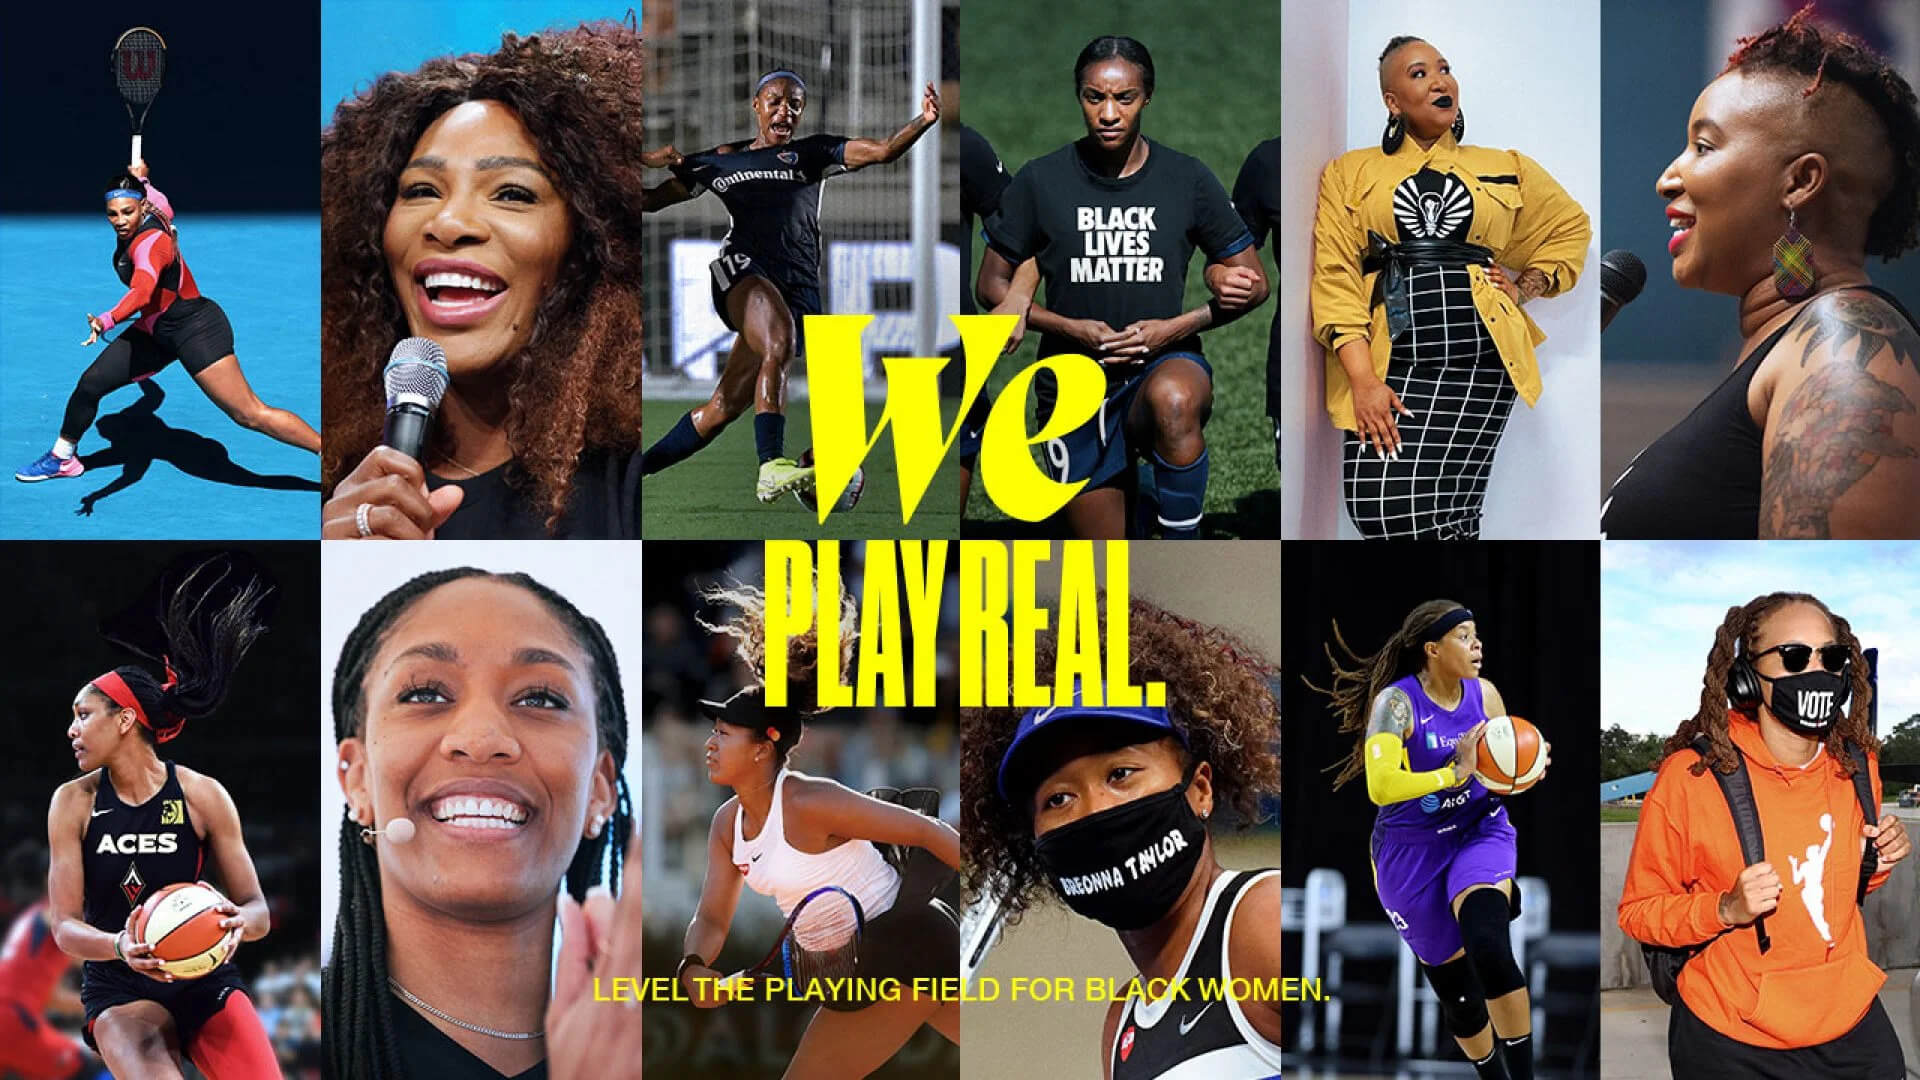 We Play Real | Nike celebrating women in sports